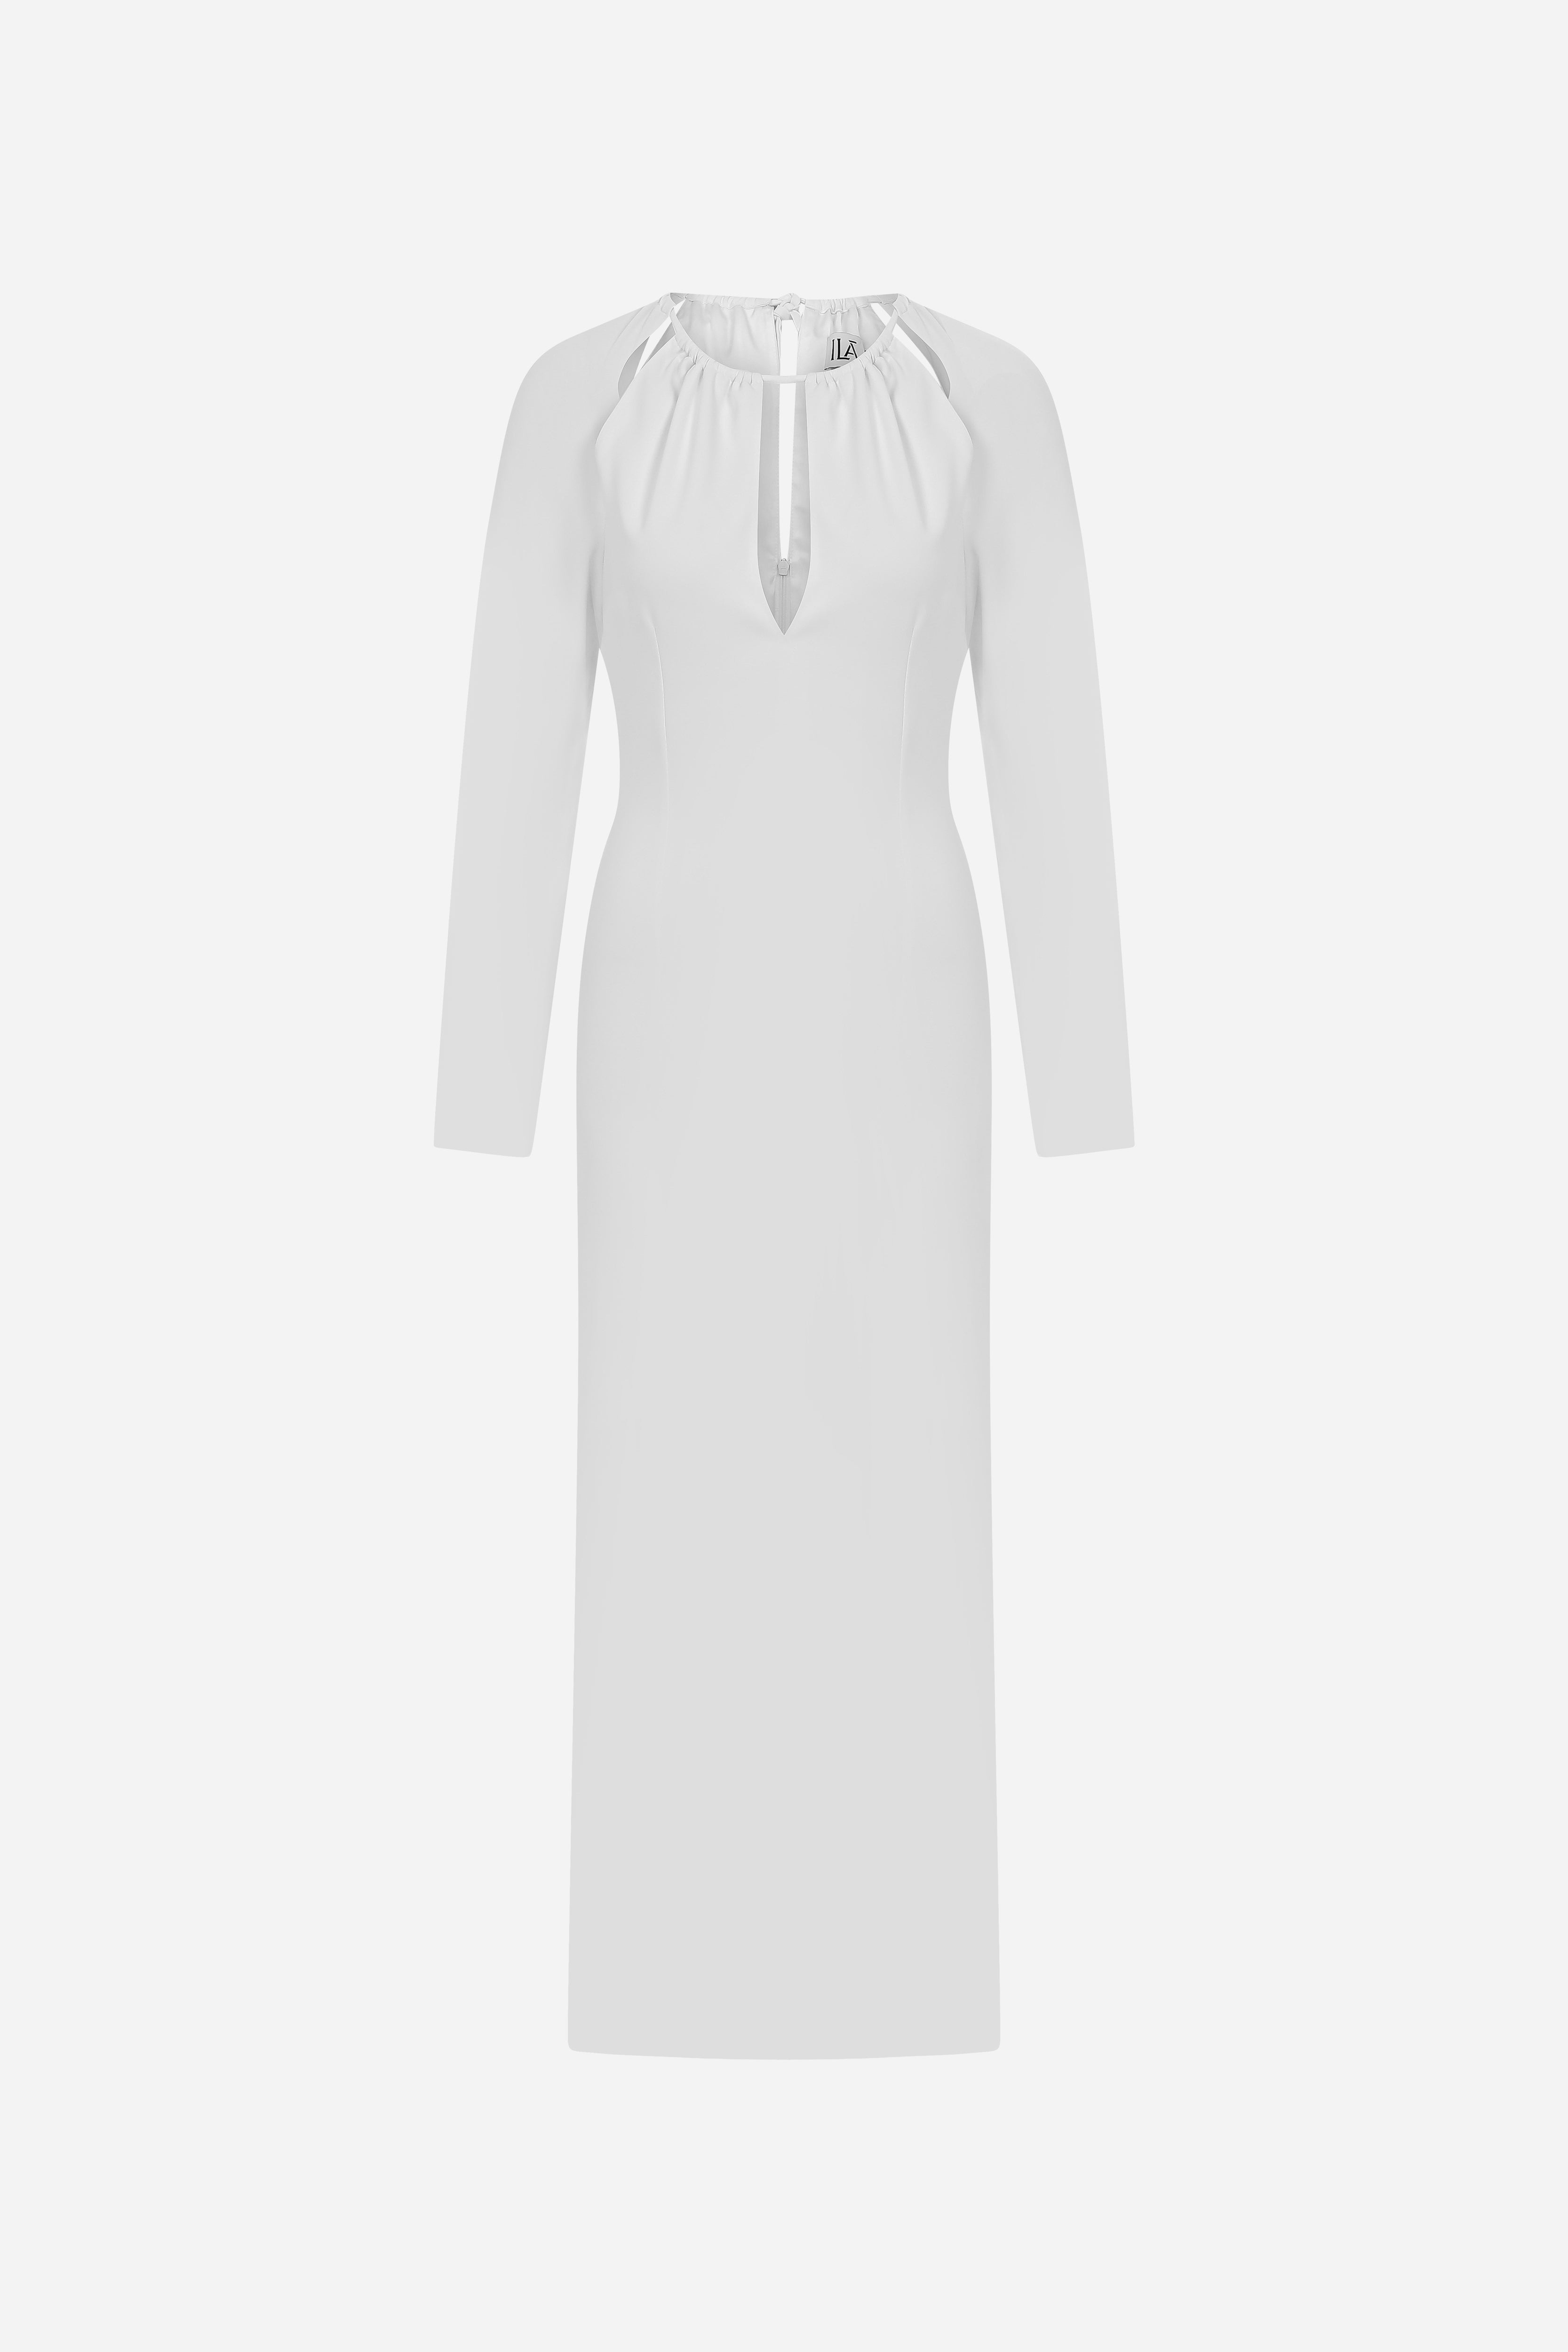 ANG-LONG SLEEVE DRESS WITH DRAPE DETAILS